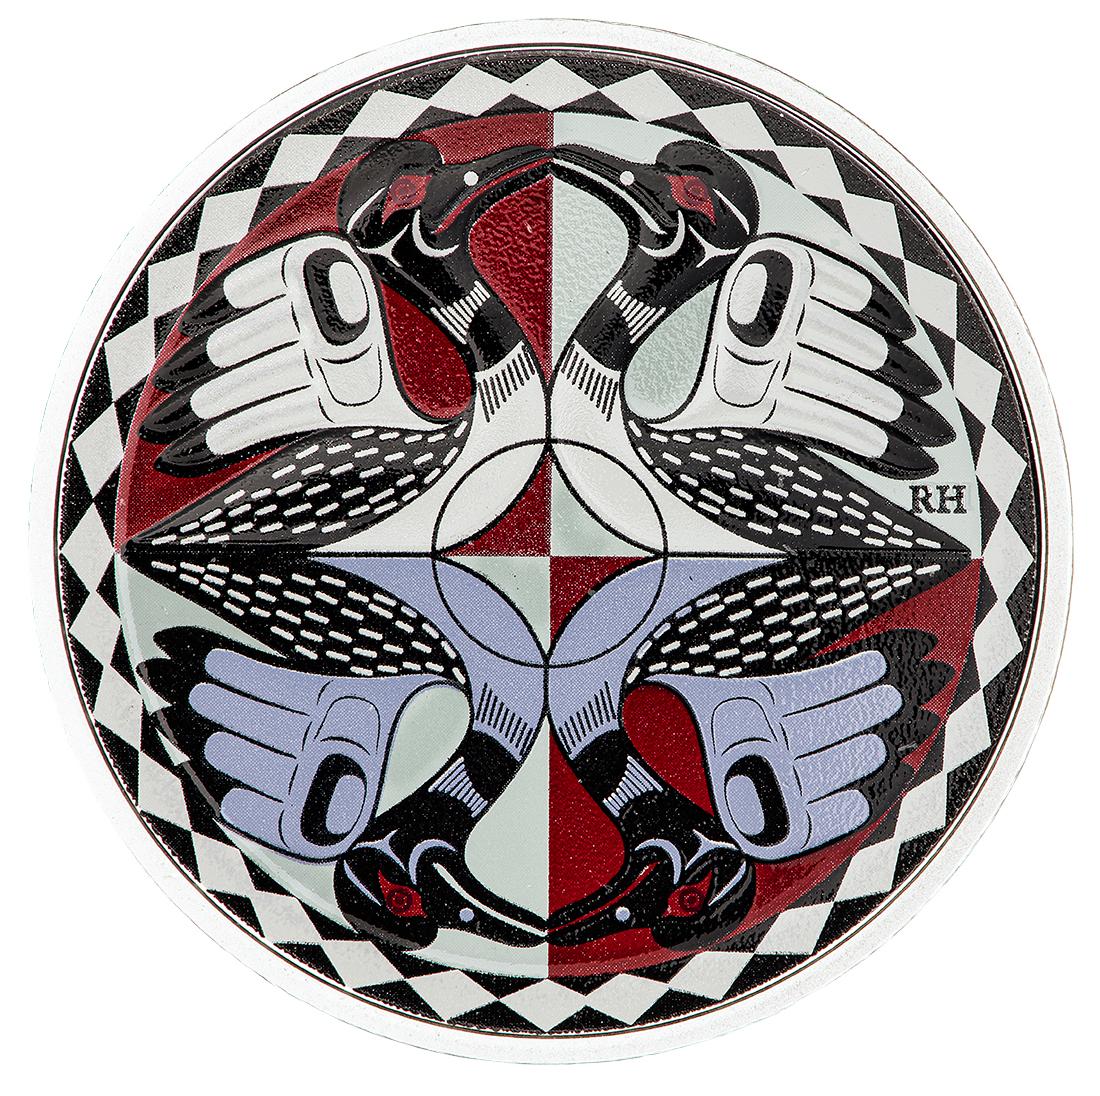 Coin, silver, divided into quarters each with a stylized bird, on backgrounds of red, blue and turquoise.